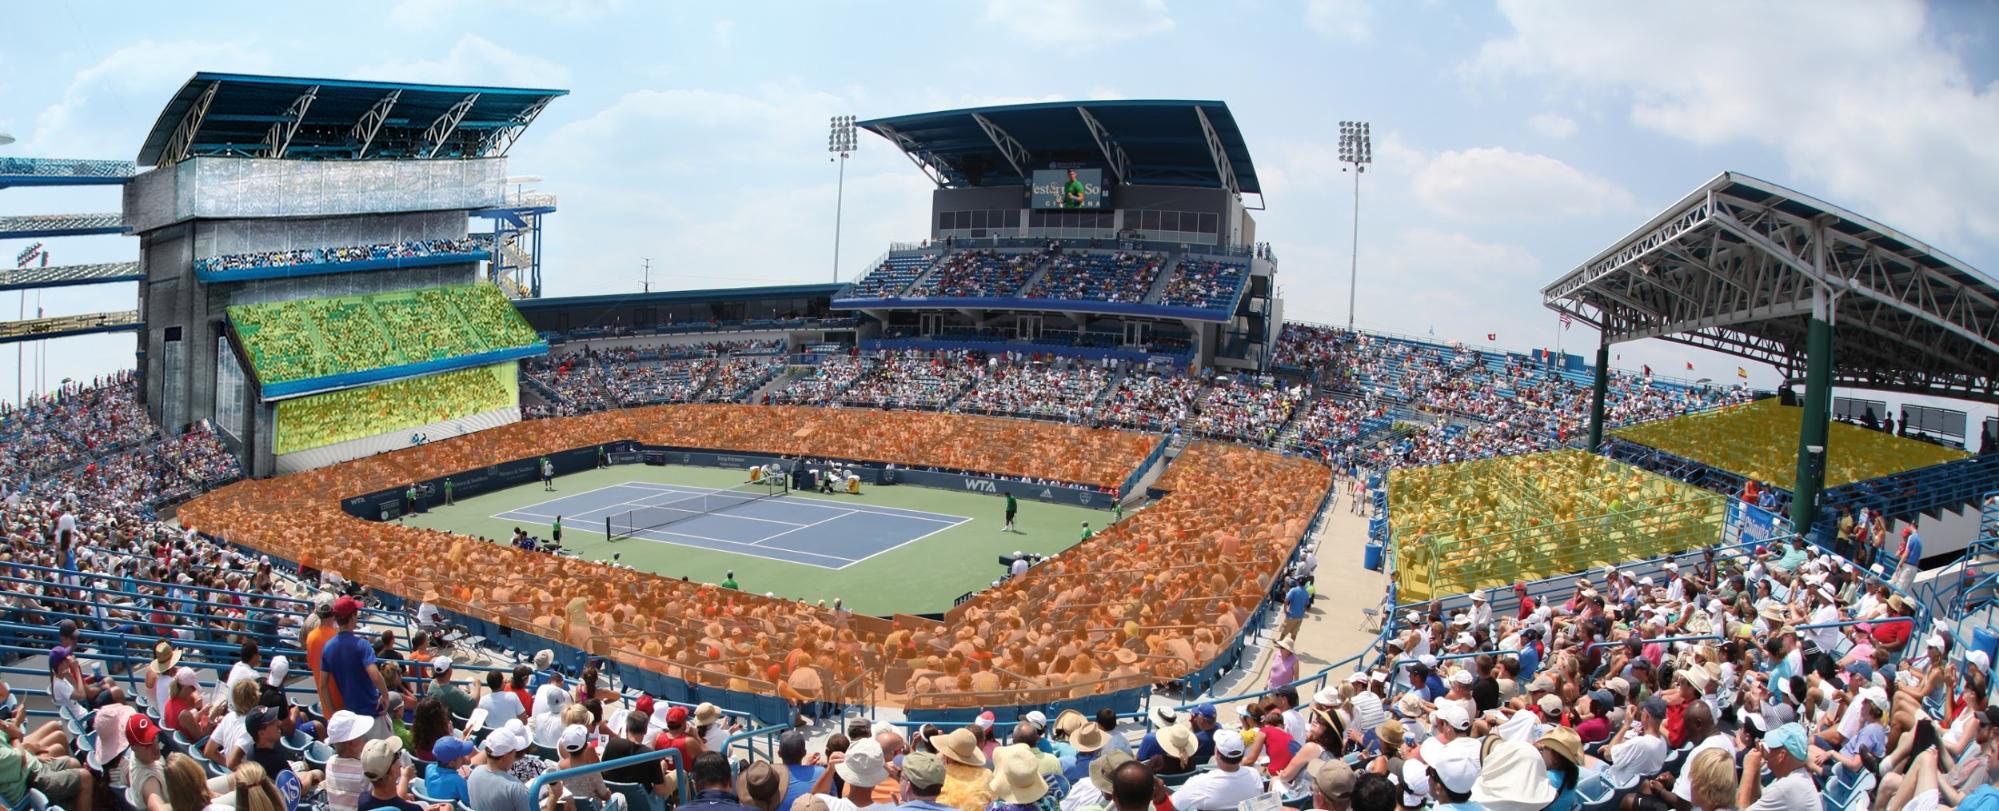 17 Top Images Lindner Family Tennis Center Cincinnati - Western Southern Open On Twitter See Action All Over The Lindner Family Tennis Center A Limited Number Of Grounds Pass Tickets For Select Sessions Will Go On Sale Today At 10